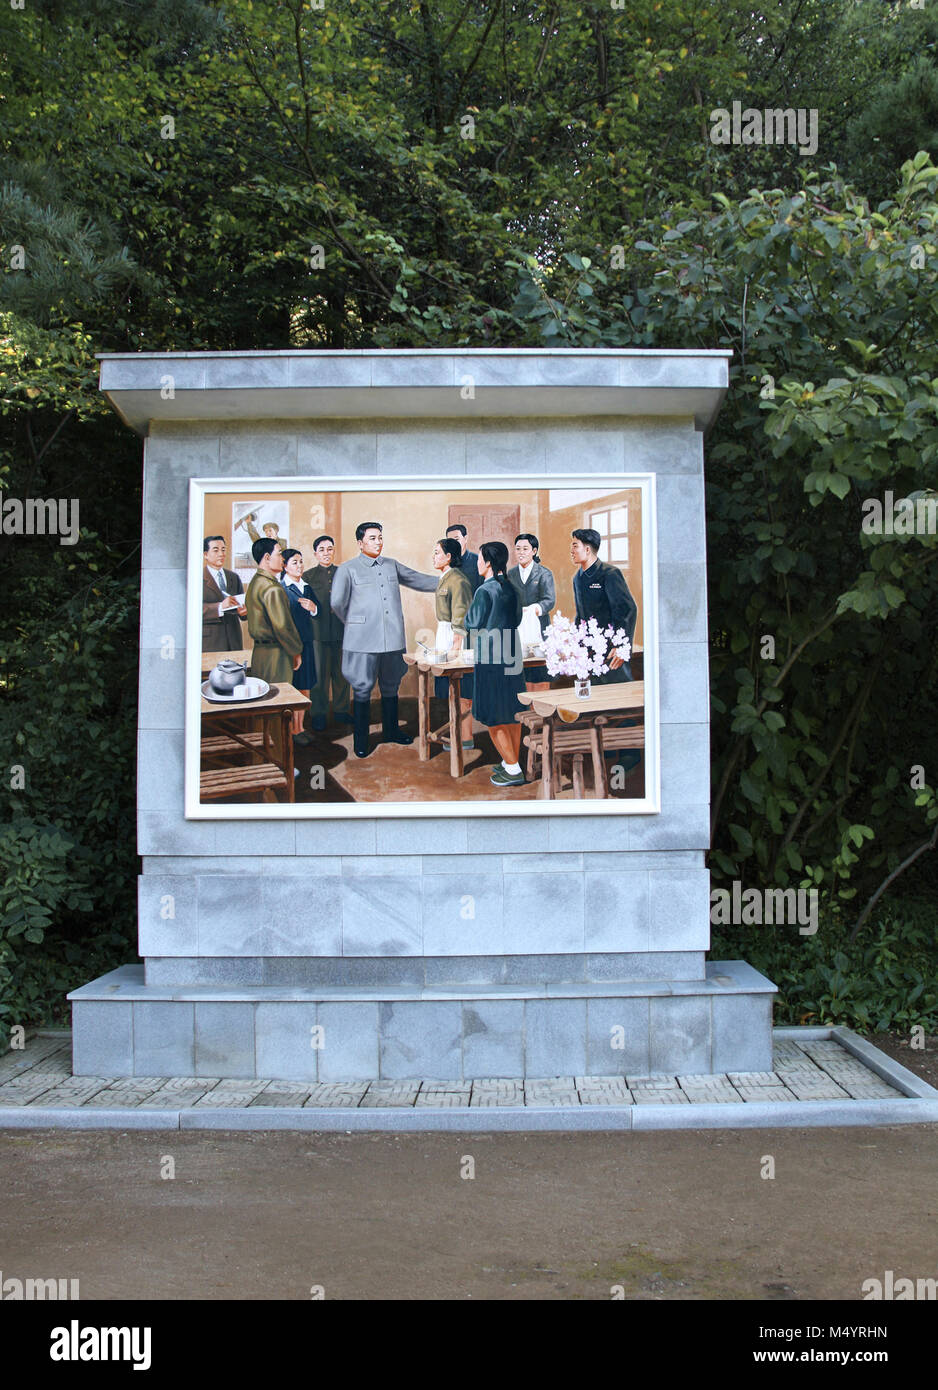 NORTH KOREA, PYHENSON - SEPTEMBER 19, 2017: Stele with picture 'Great leader comrade Kim Il Sung speaks with students', revolutionary historical site  Stock Photo